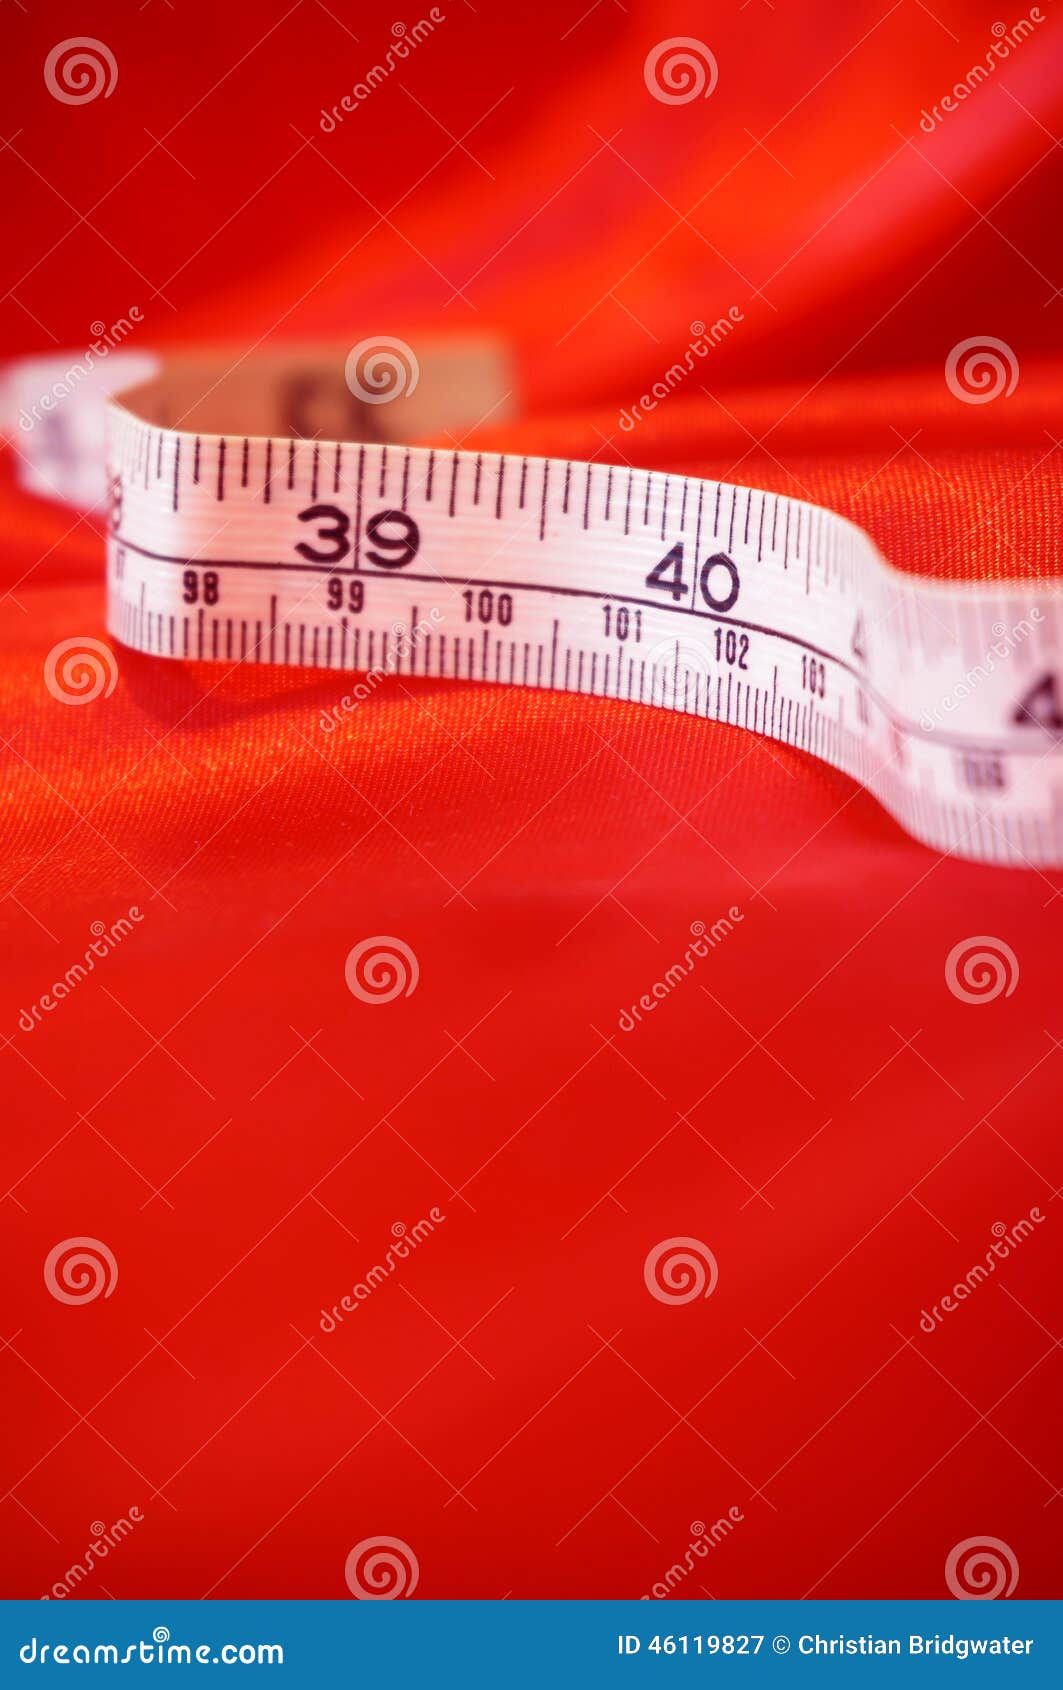 78+ Thousand Cloth Tape Measure Royalty-Free Images, Stock Photos &  Pictures